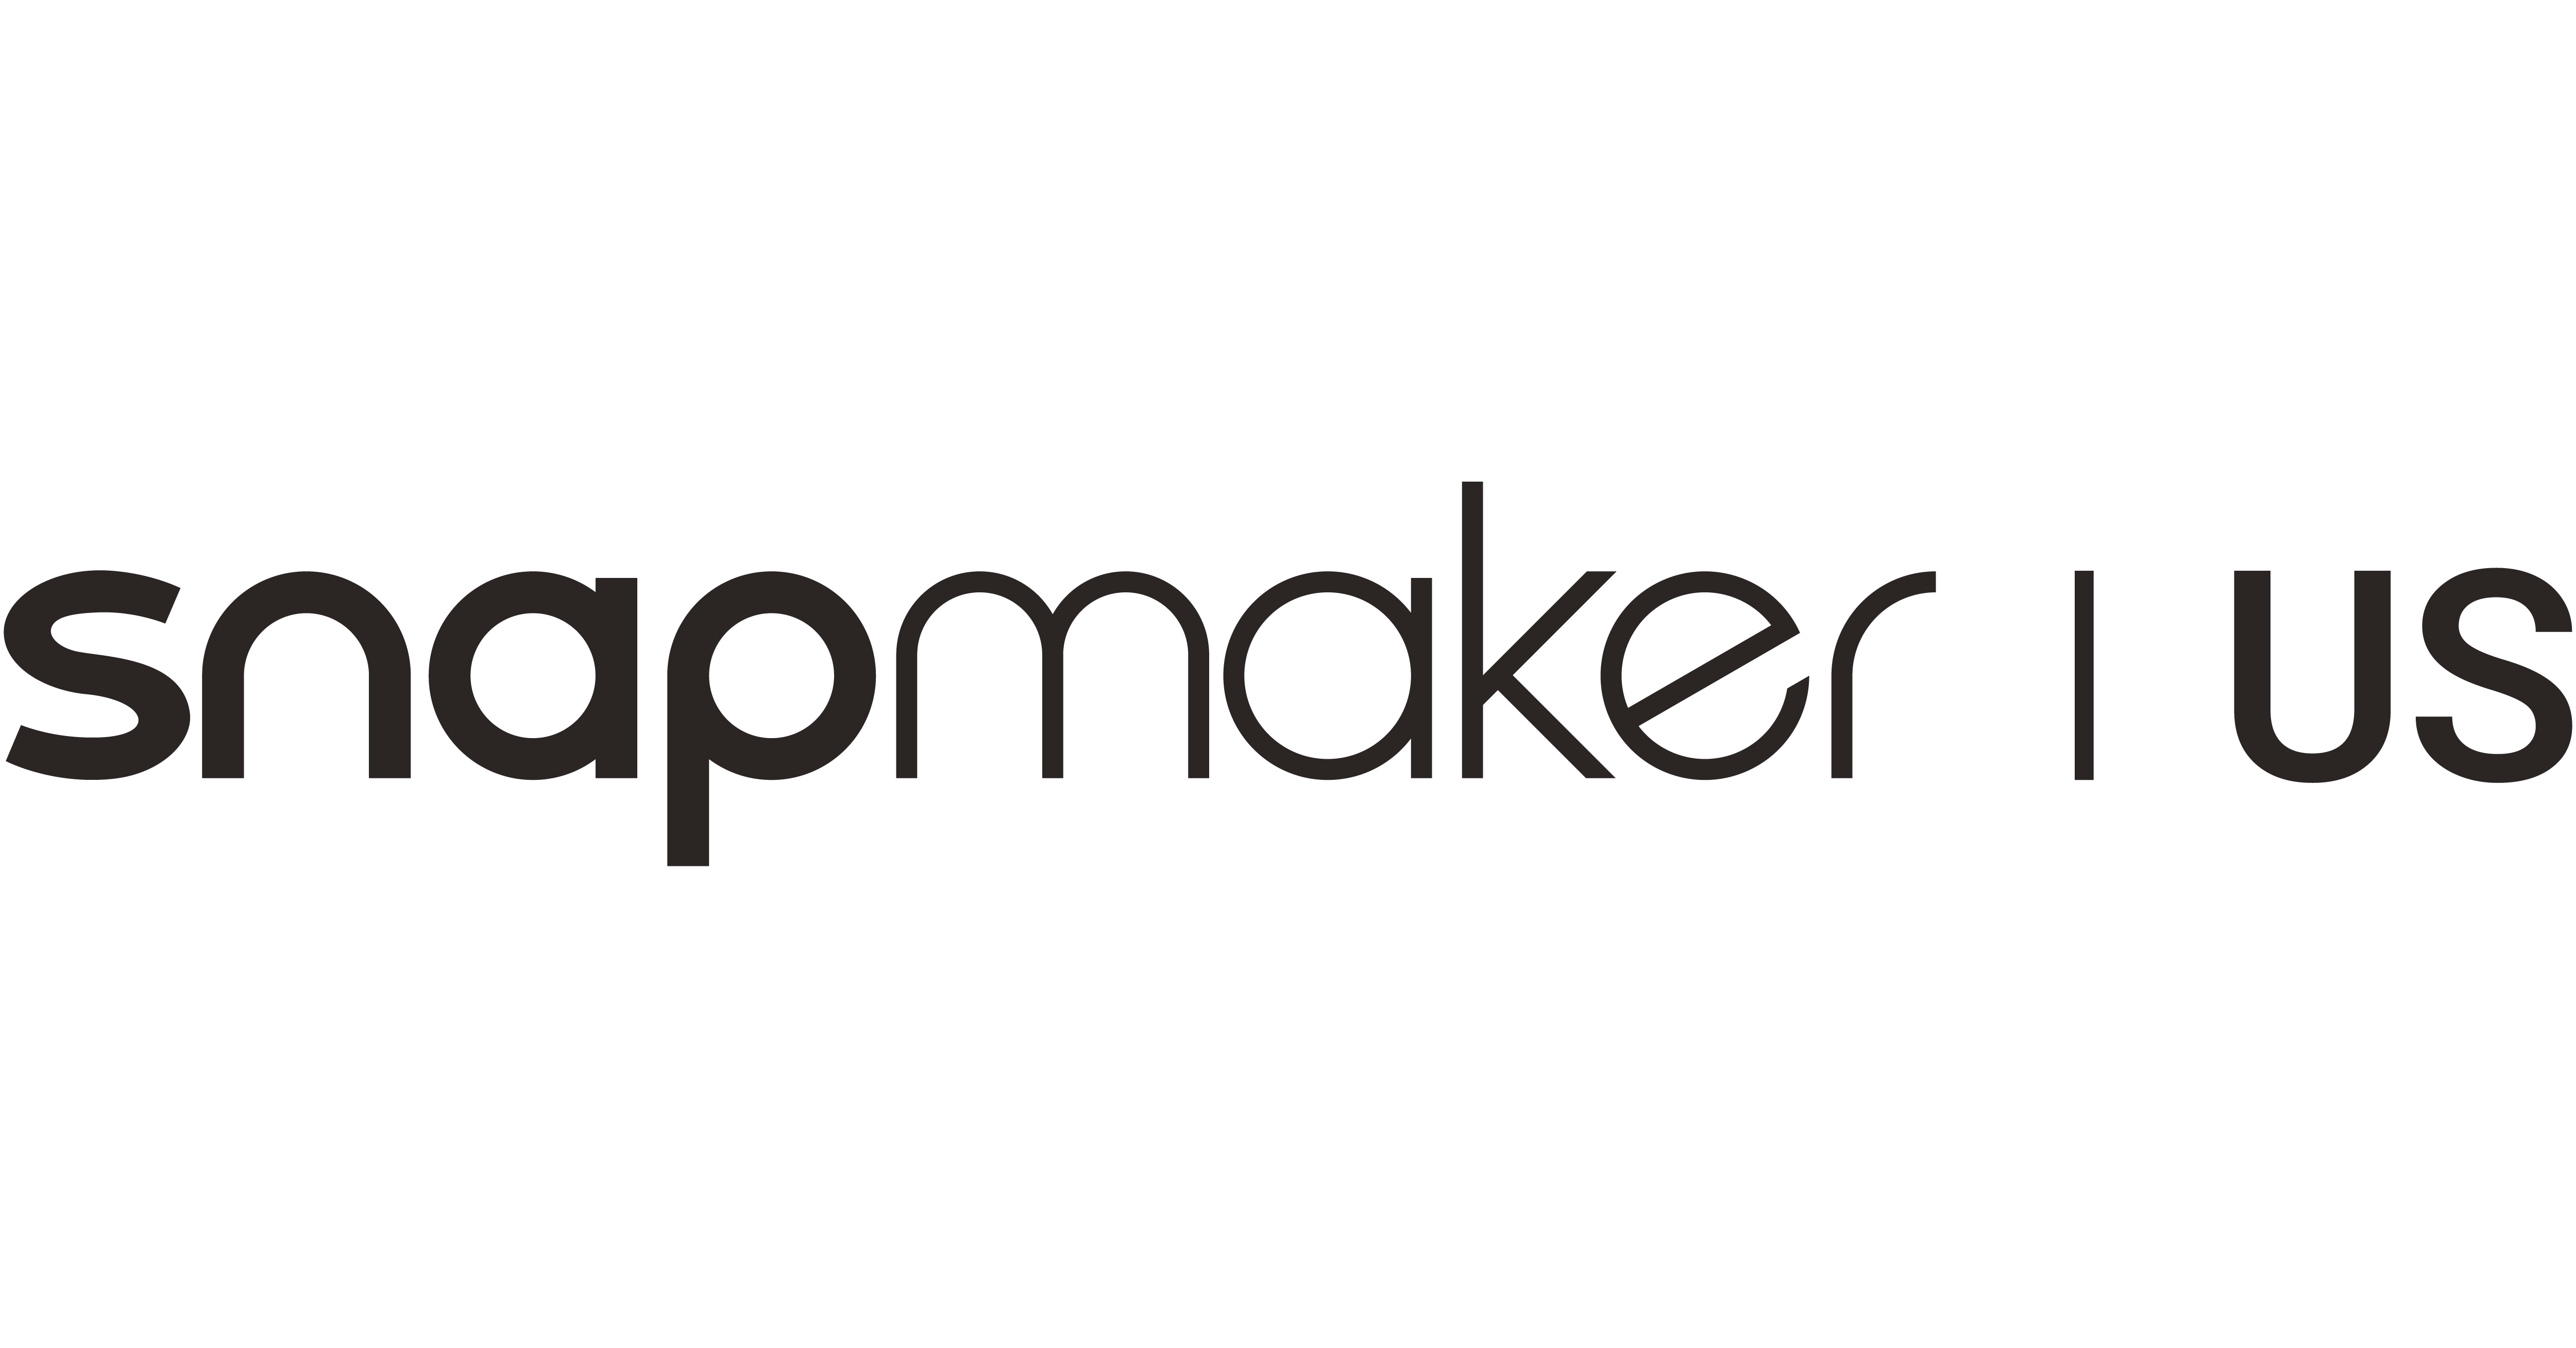 Snapmaker Christmas Sale - Best Offer on 3D Printer & Materials
– Snapmaker US
